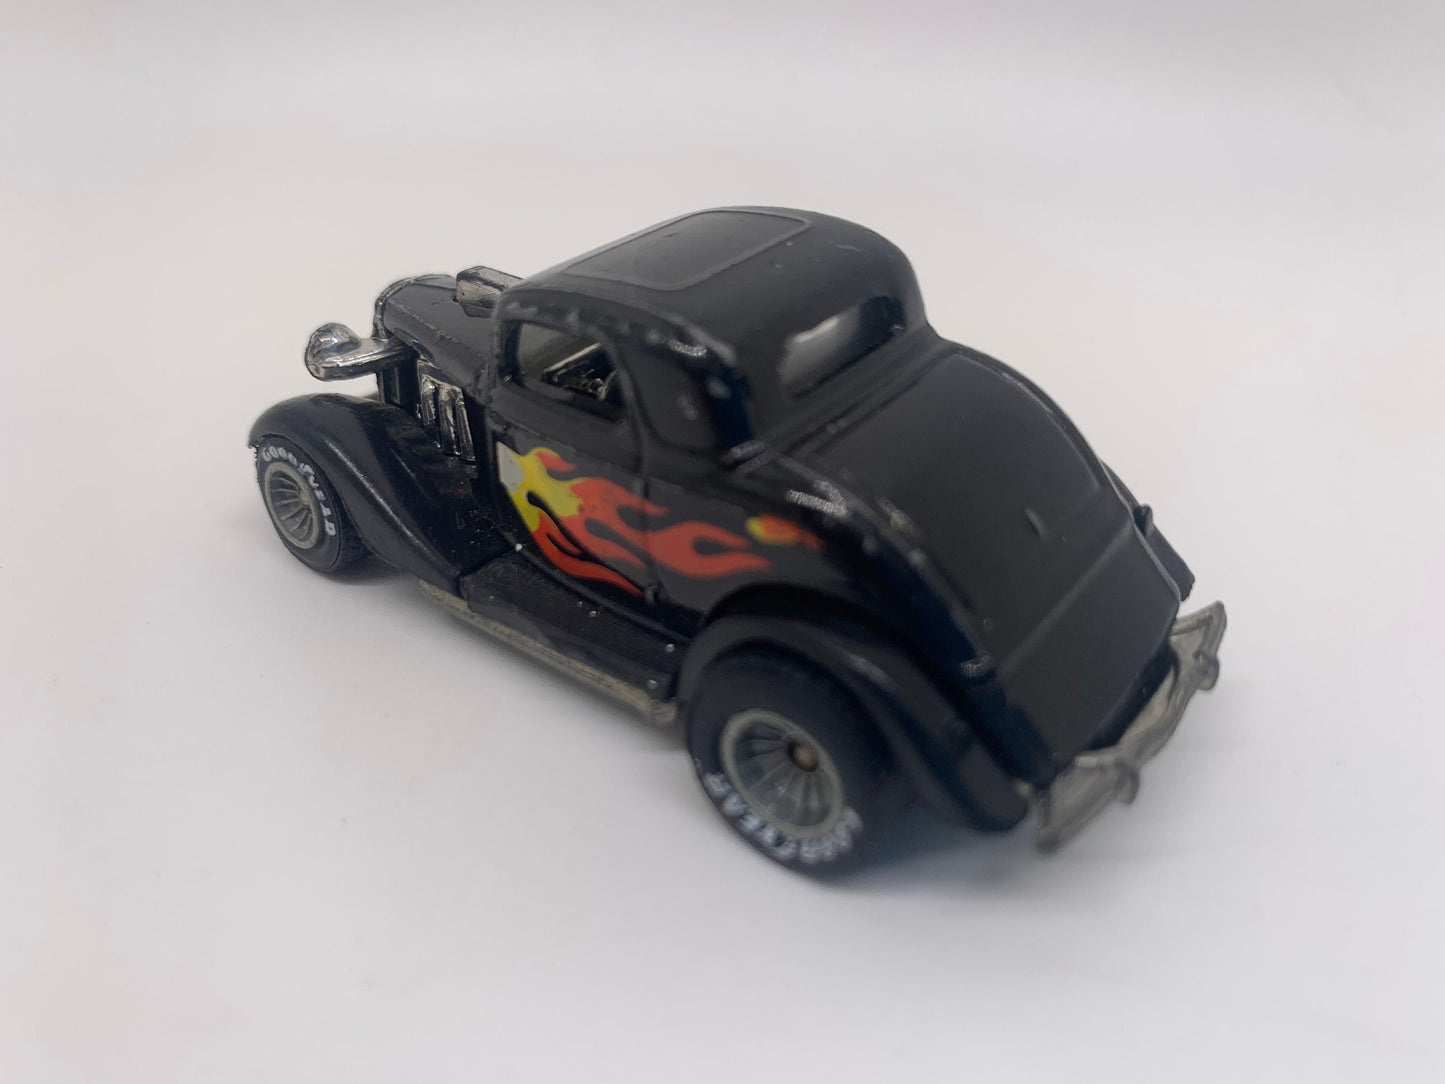 Hot Wheels 3-Window '34 Ford Coupe Black HiRakers Real Riders Perfect Birthday Gift Miniature Collectable Scale Model Toy Car